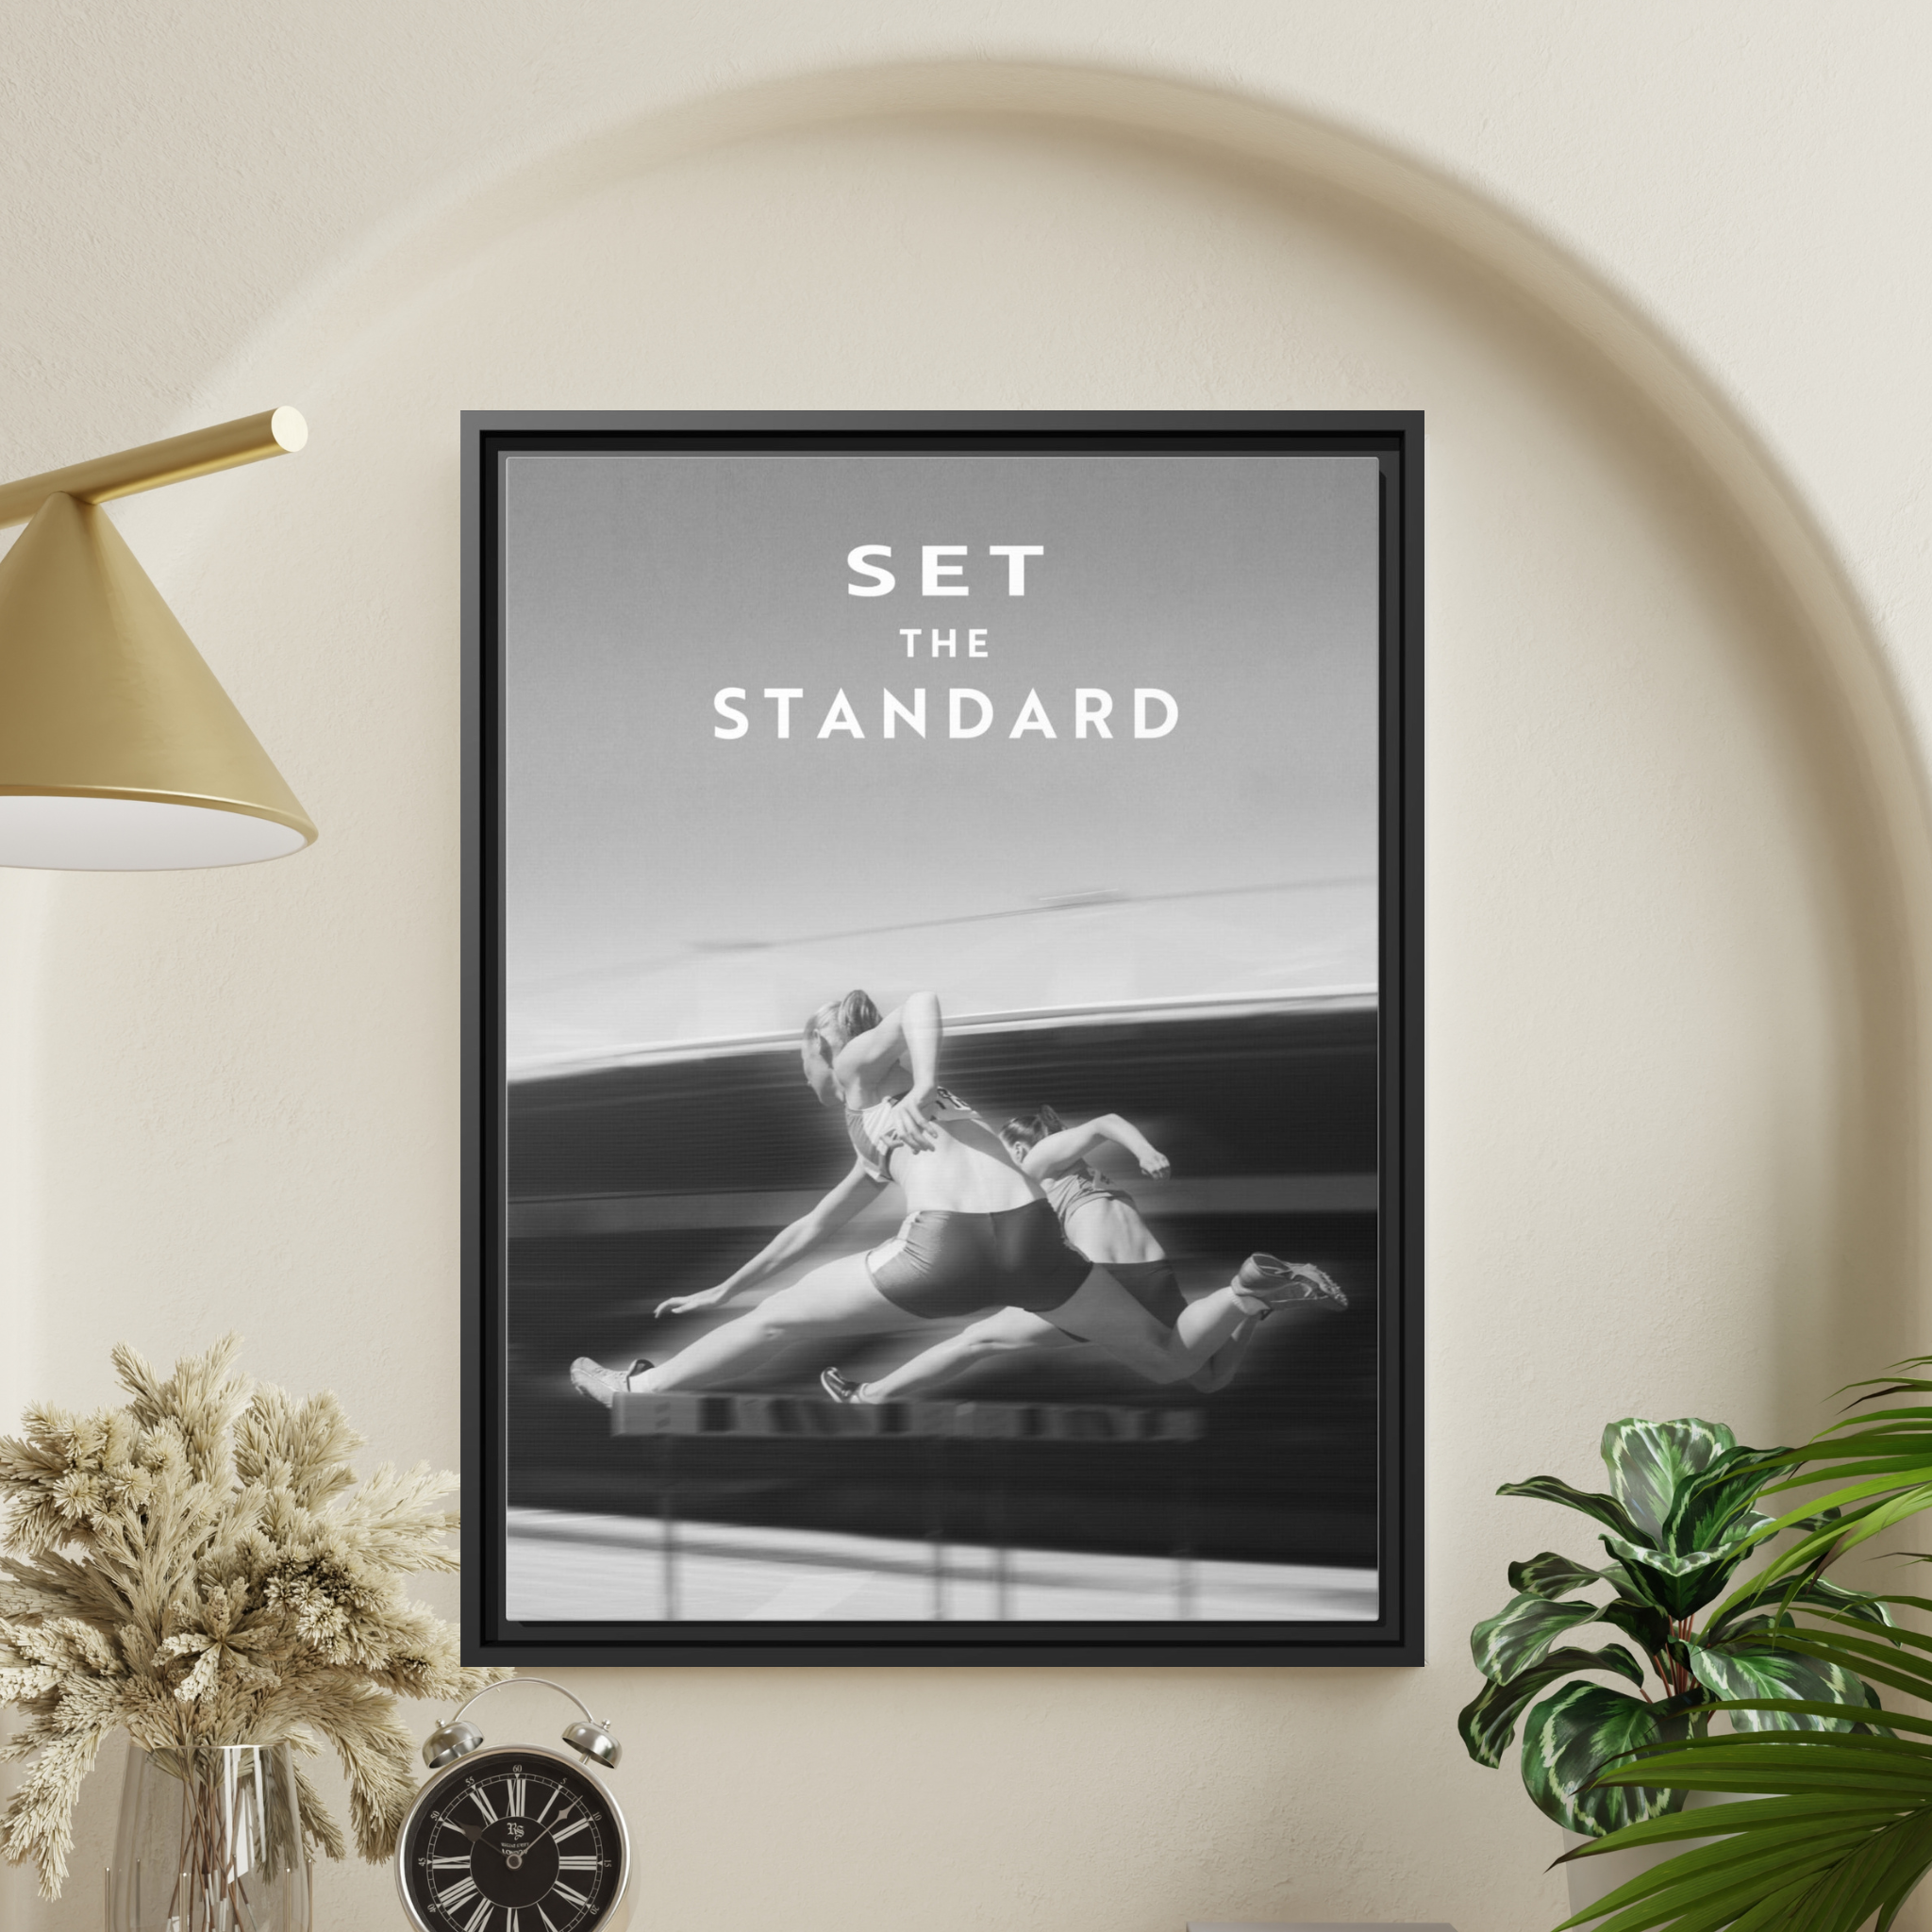 Set The Standard - Black And White - Wall Art additional image 1